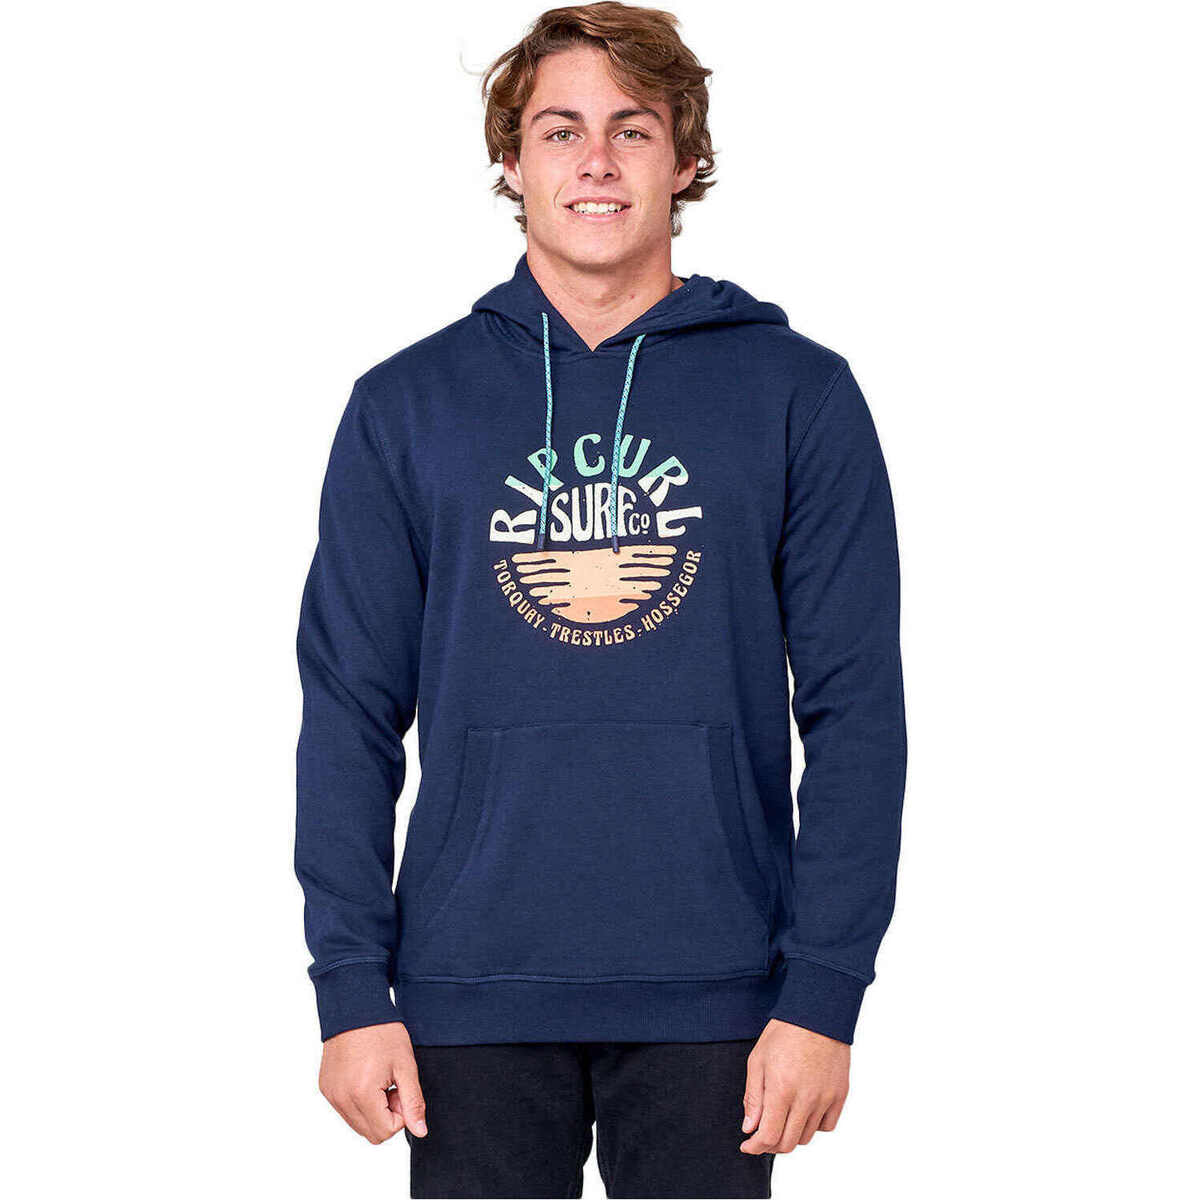 textil Hombre Sudaderas Rip Curl DOWN THE LINE HOODED POP OVER Marino